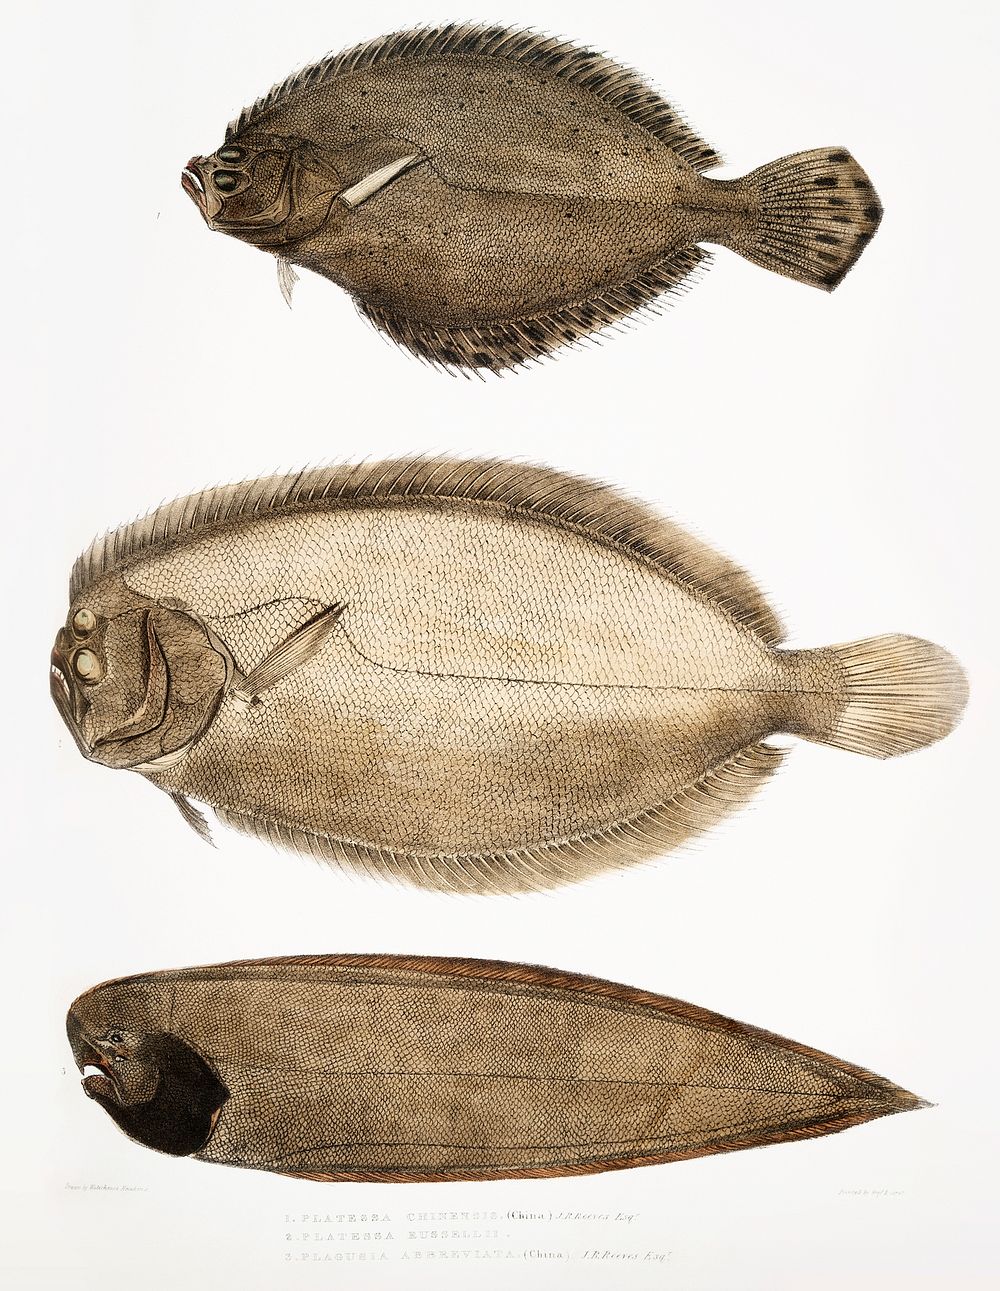 1. Chinese Plaice (Platessa Chinensis); 2. Dr. Russell's Plaice (Platessa Russellii); 3. Short lined Finless Sole (Plagusia…